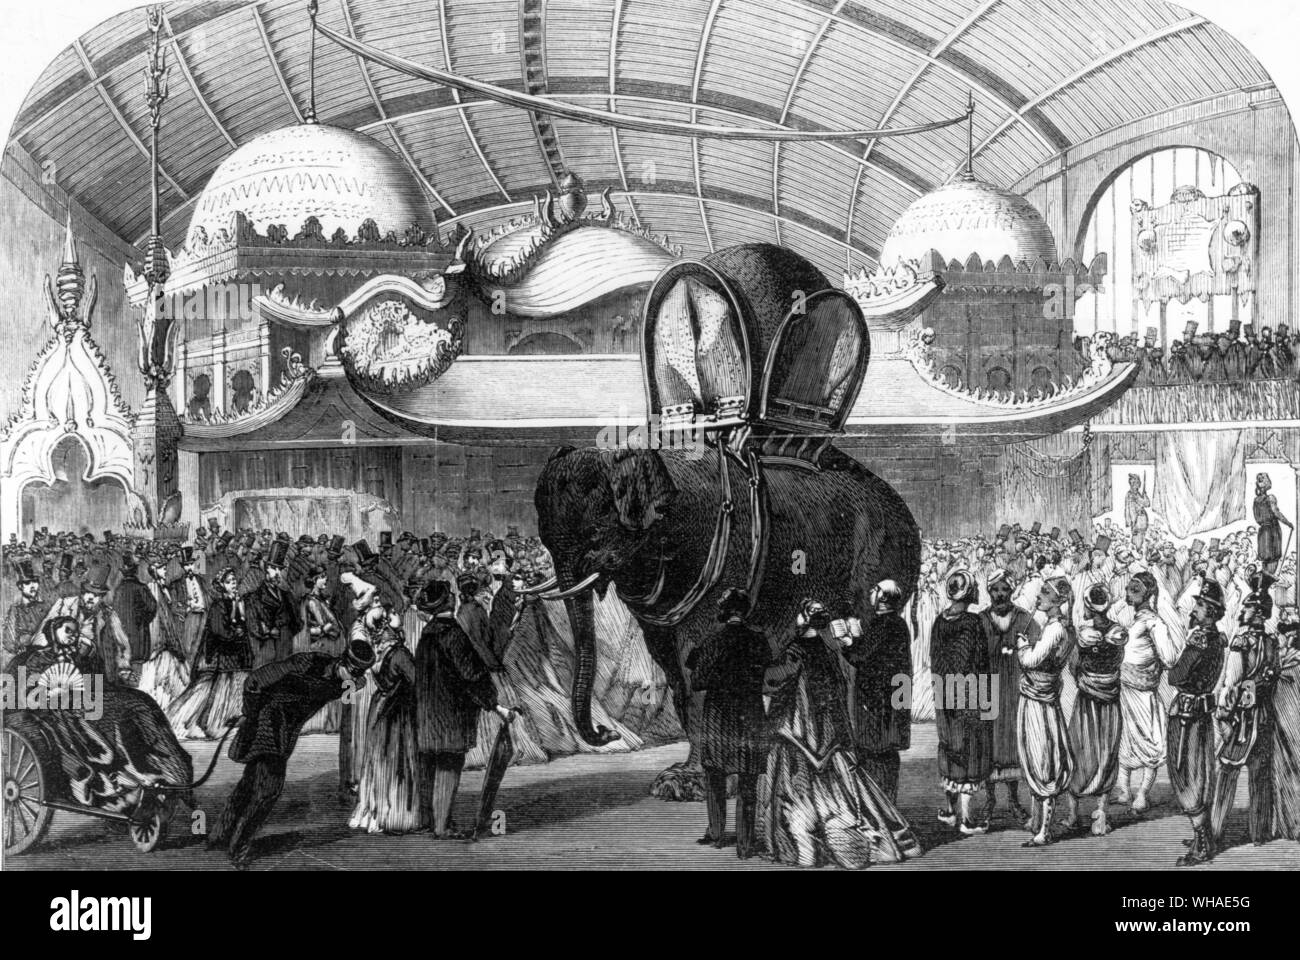 July 20th 1867 Illustrated London News. Model of an elephant in the Siamese section of the Machine Gallery at the Paris International Exhibition Stock Photo